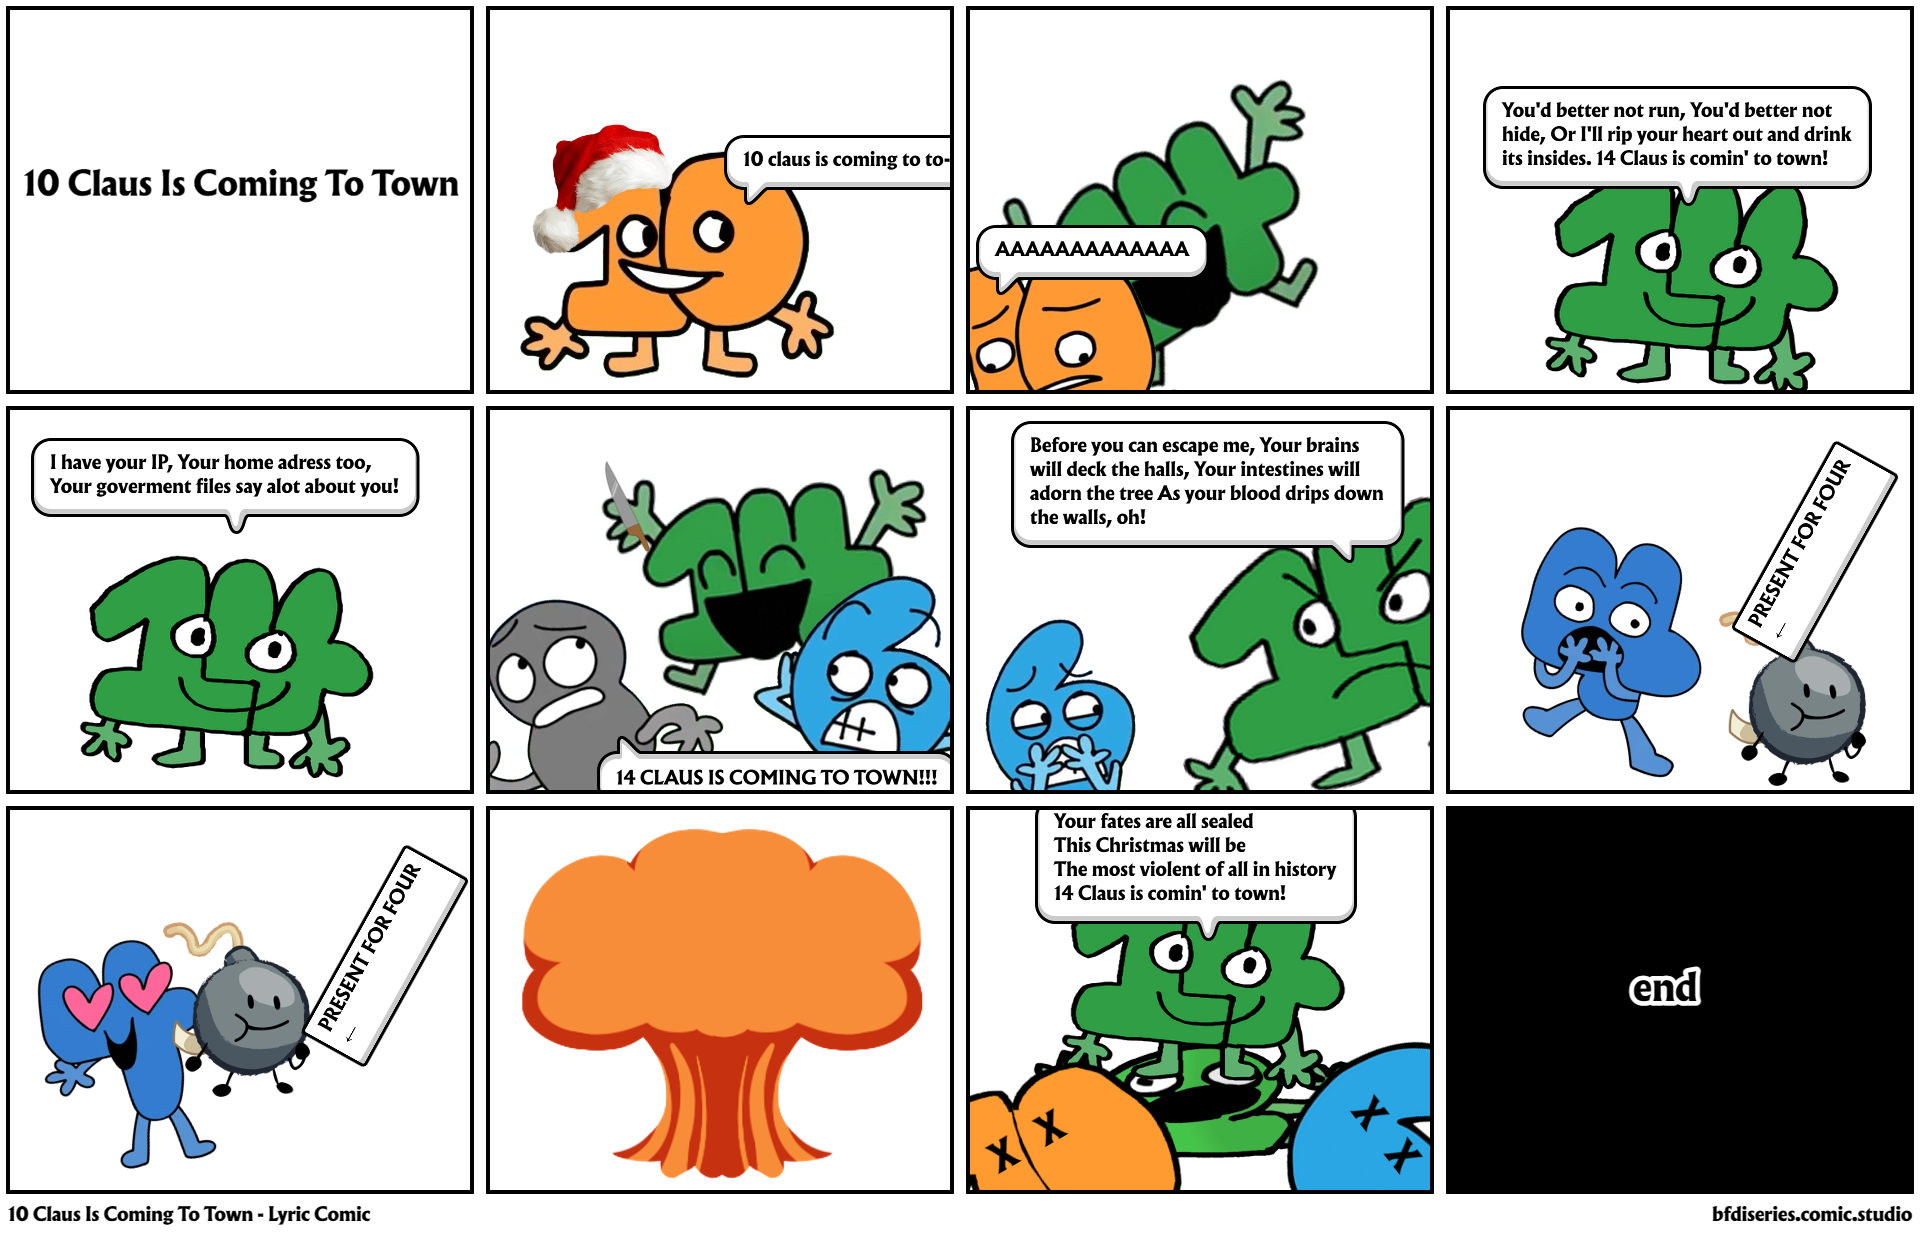 10 Claus Is Coming To Town - Lyric Comic